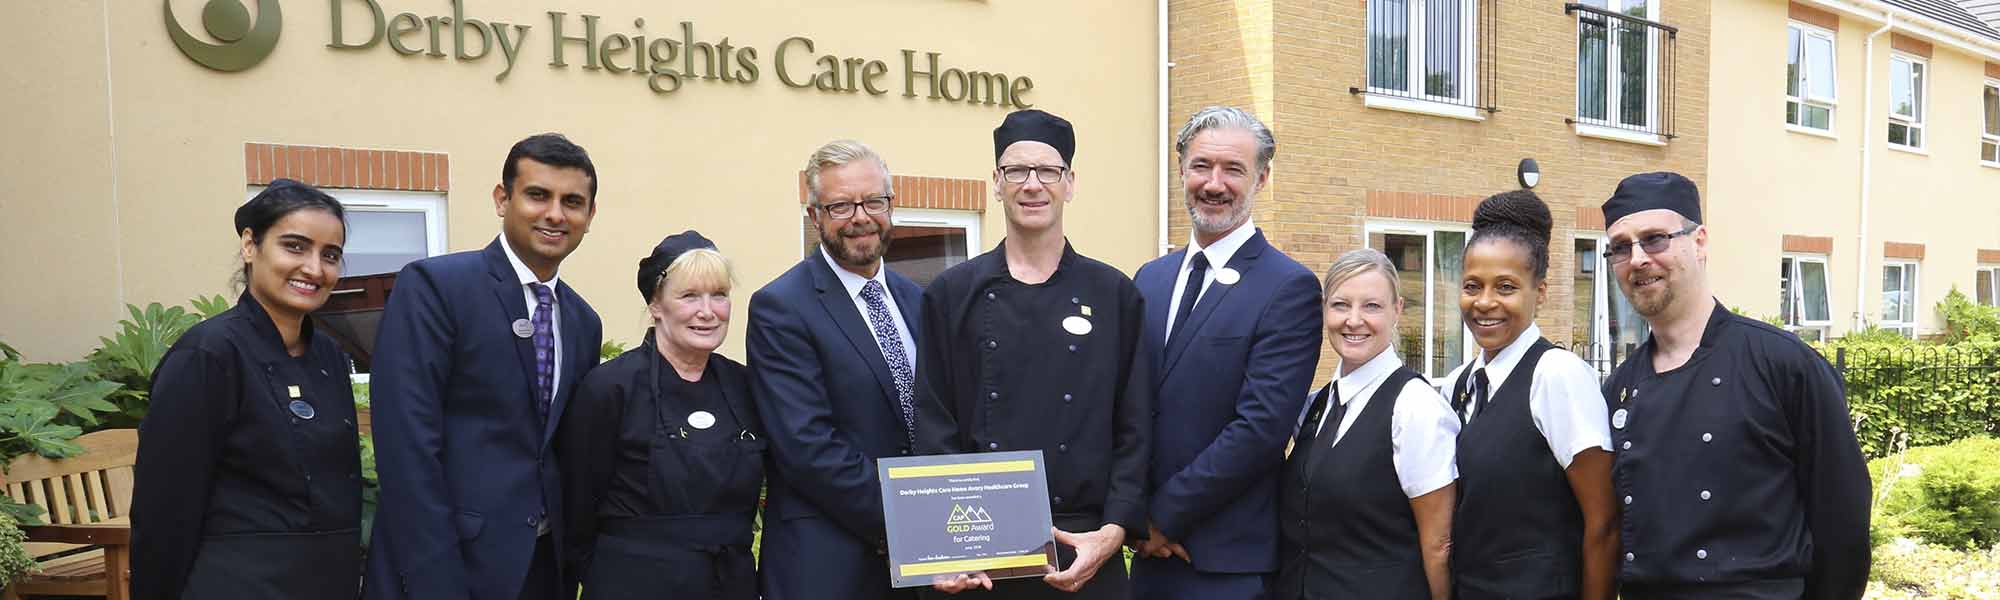 Derby Heights Care Home Littleover CAP Awards Hospitality Catering team photo banner hero image